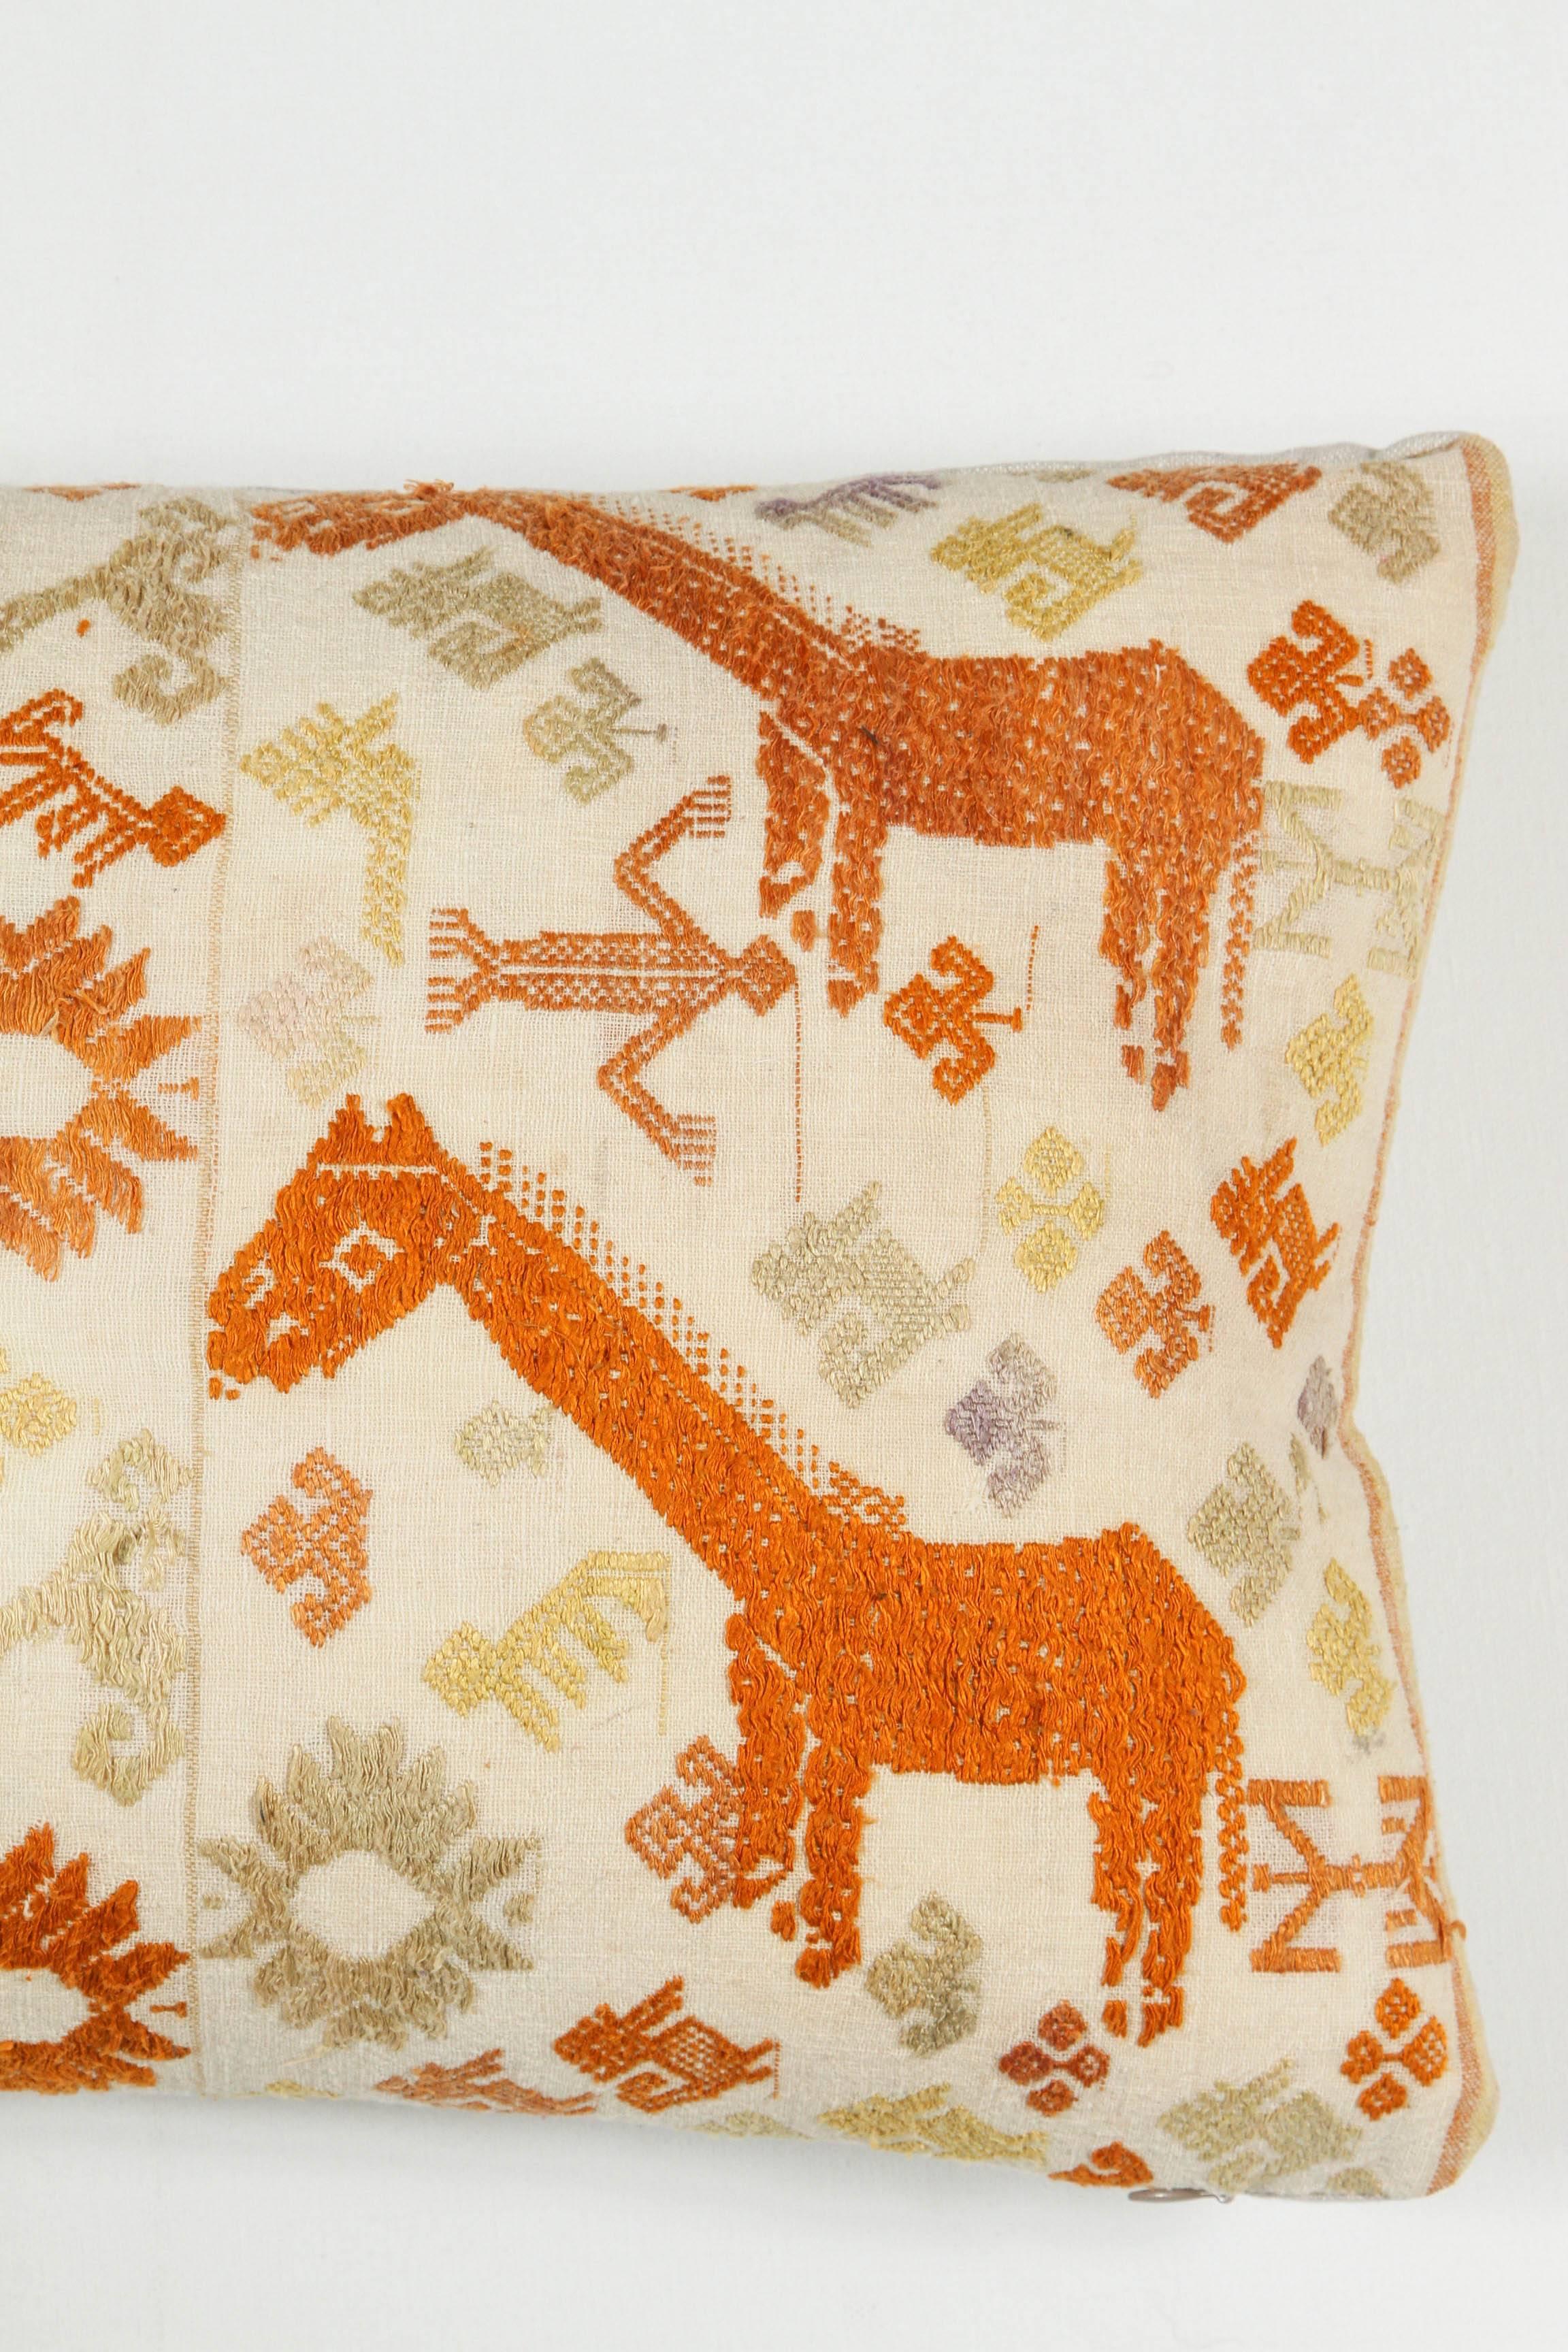 Vintage Tai (Ethnic minority group resident in Laos and Vietnam) Hill Tribe textile pillow.  Hand embroidery.  Cotton floss on handwoven cotton fabric.  Dragon and giraffe motif.  Natural linen back,  invisible zipper and feather and down fill.  